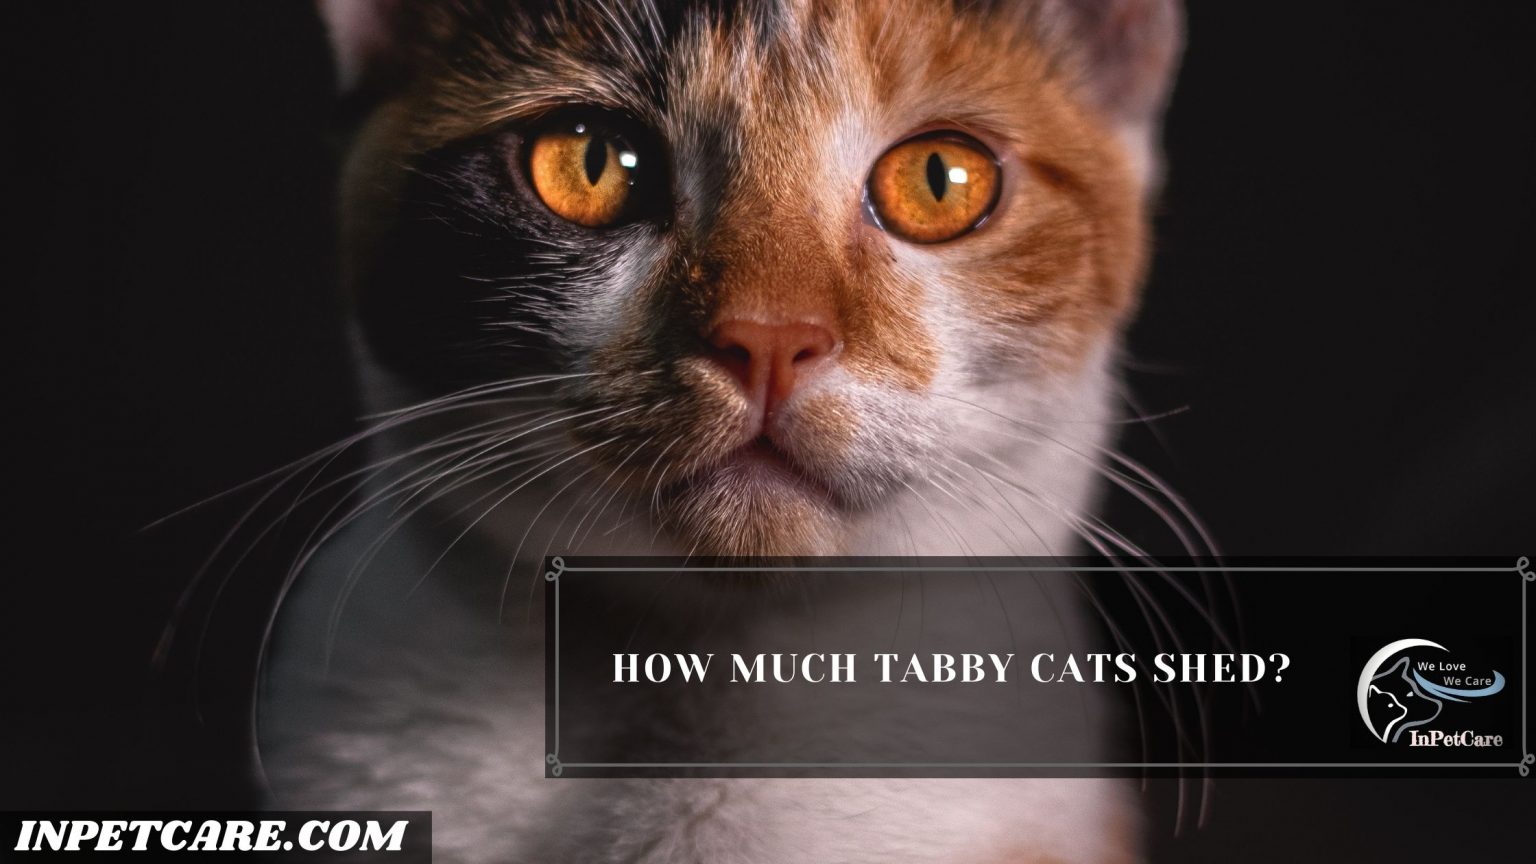 Are Tabby Cats Hypoallergenic? Tips For Family With Allergy